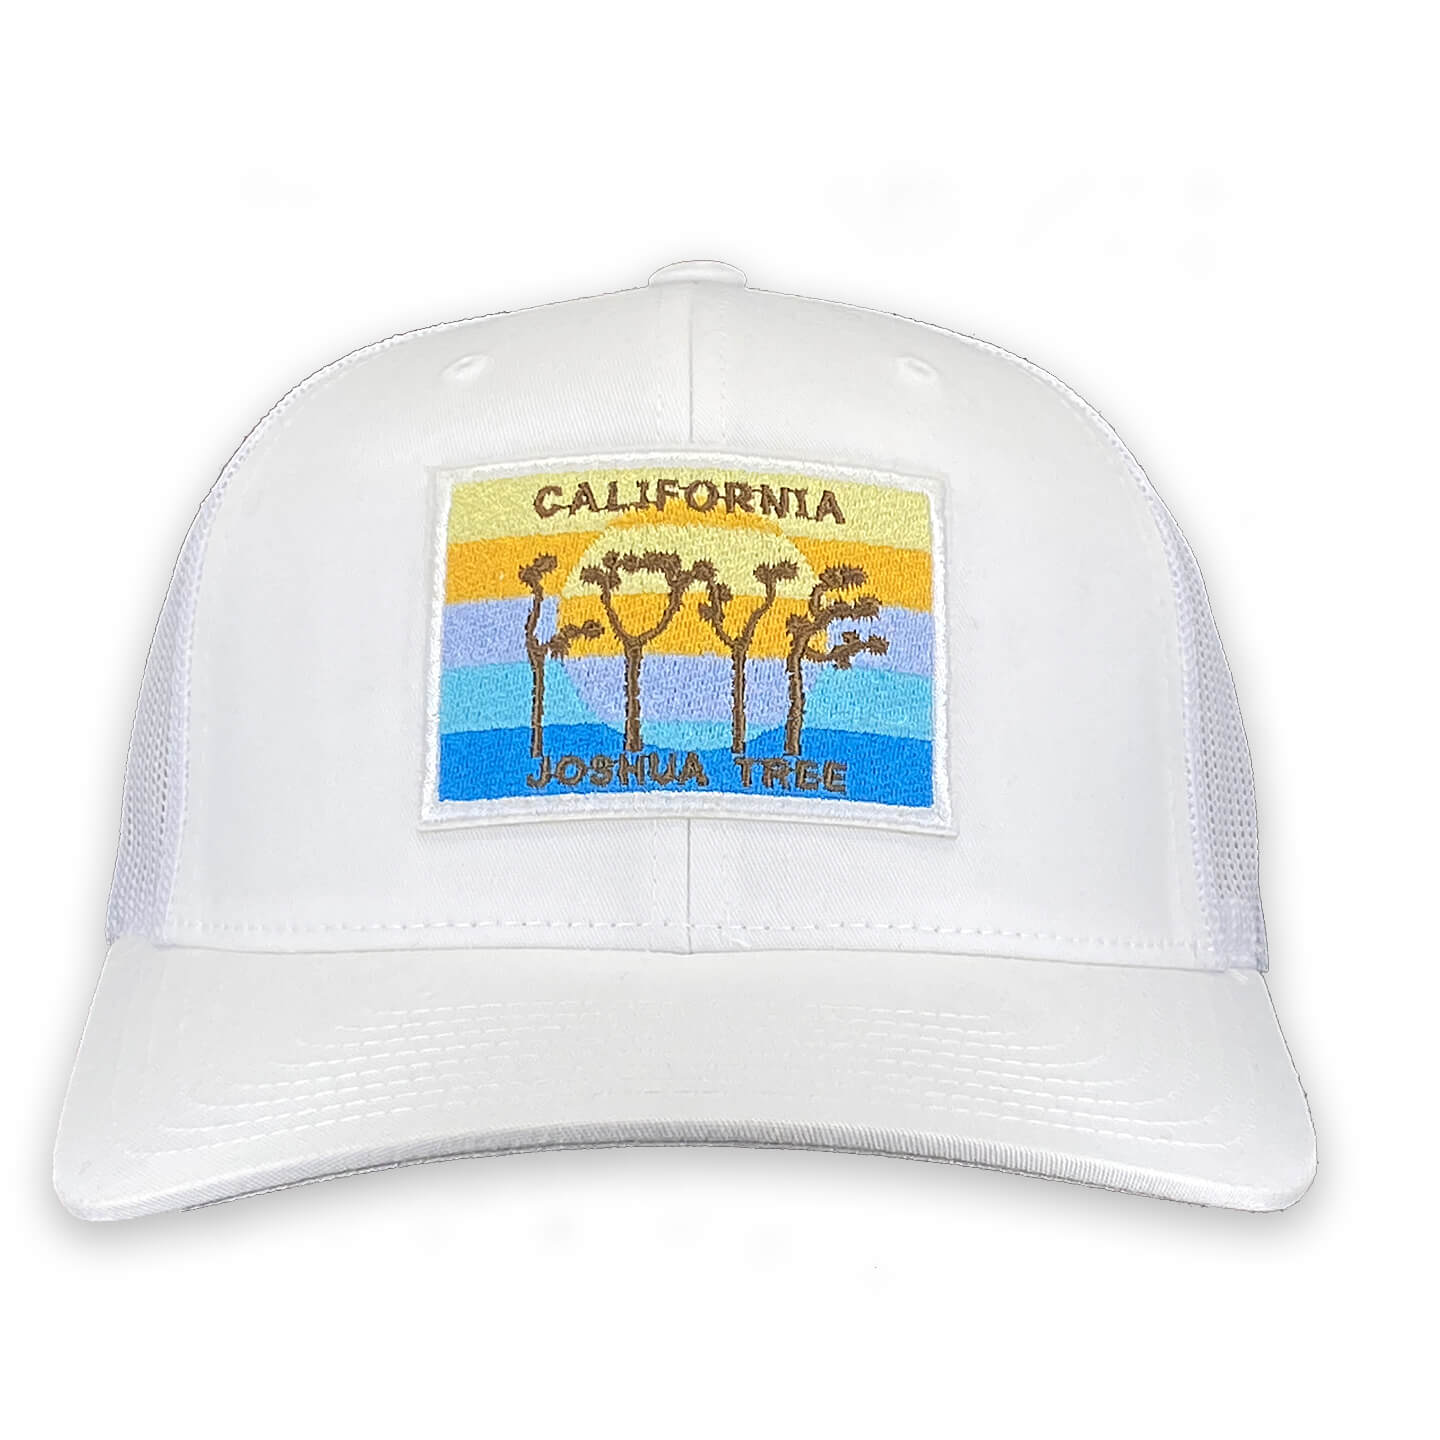 6 Panel Snapback Trucker Hat with California Love patch inspired by Joshua Tree front view